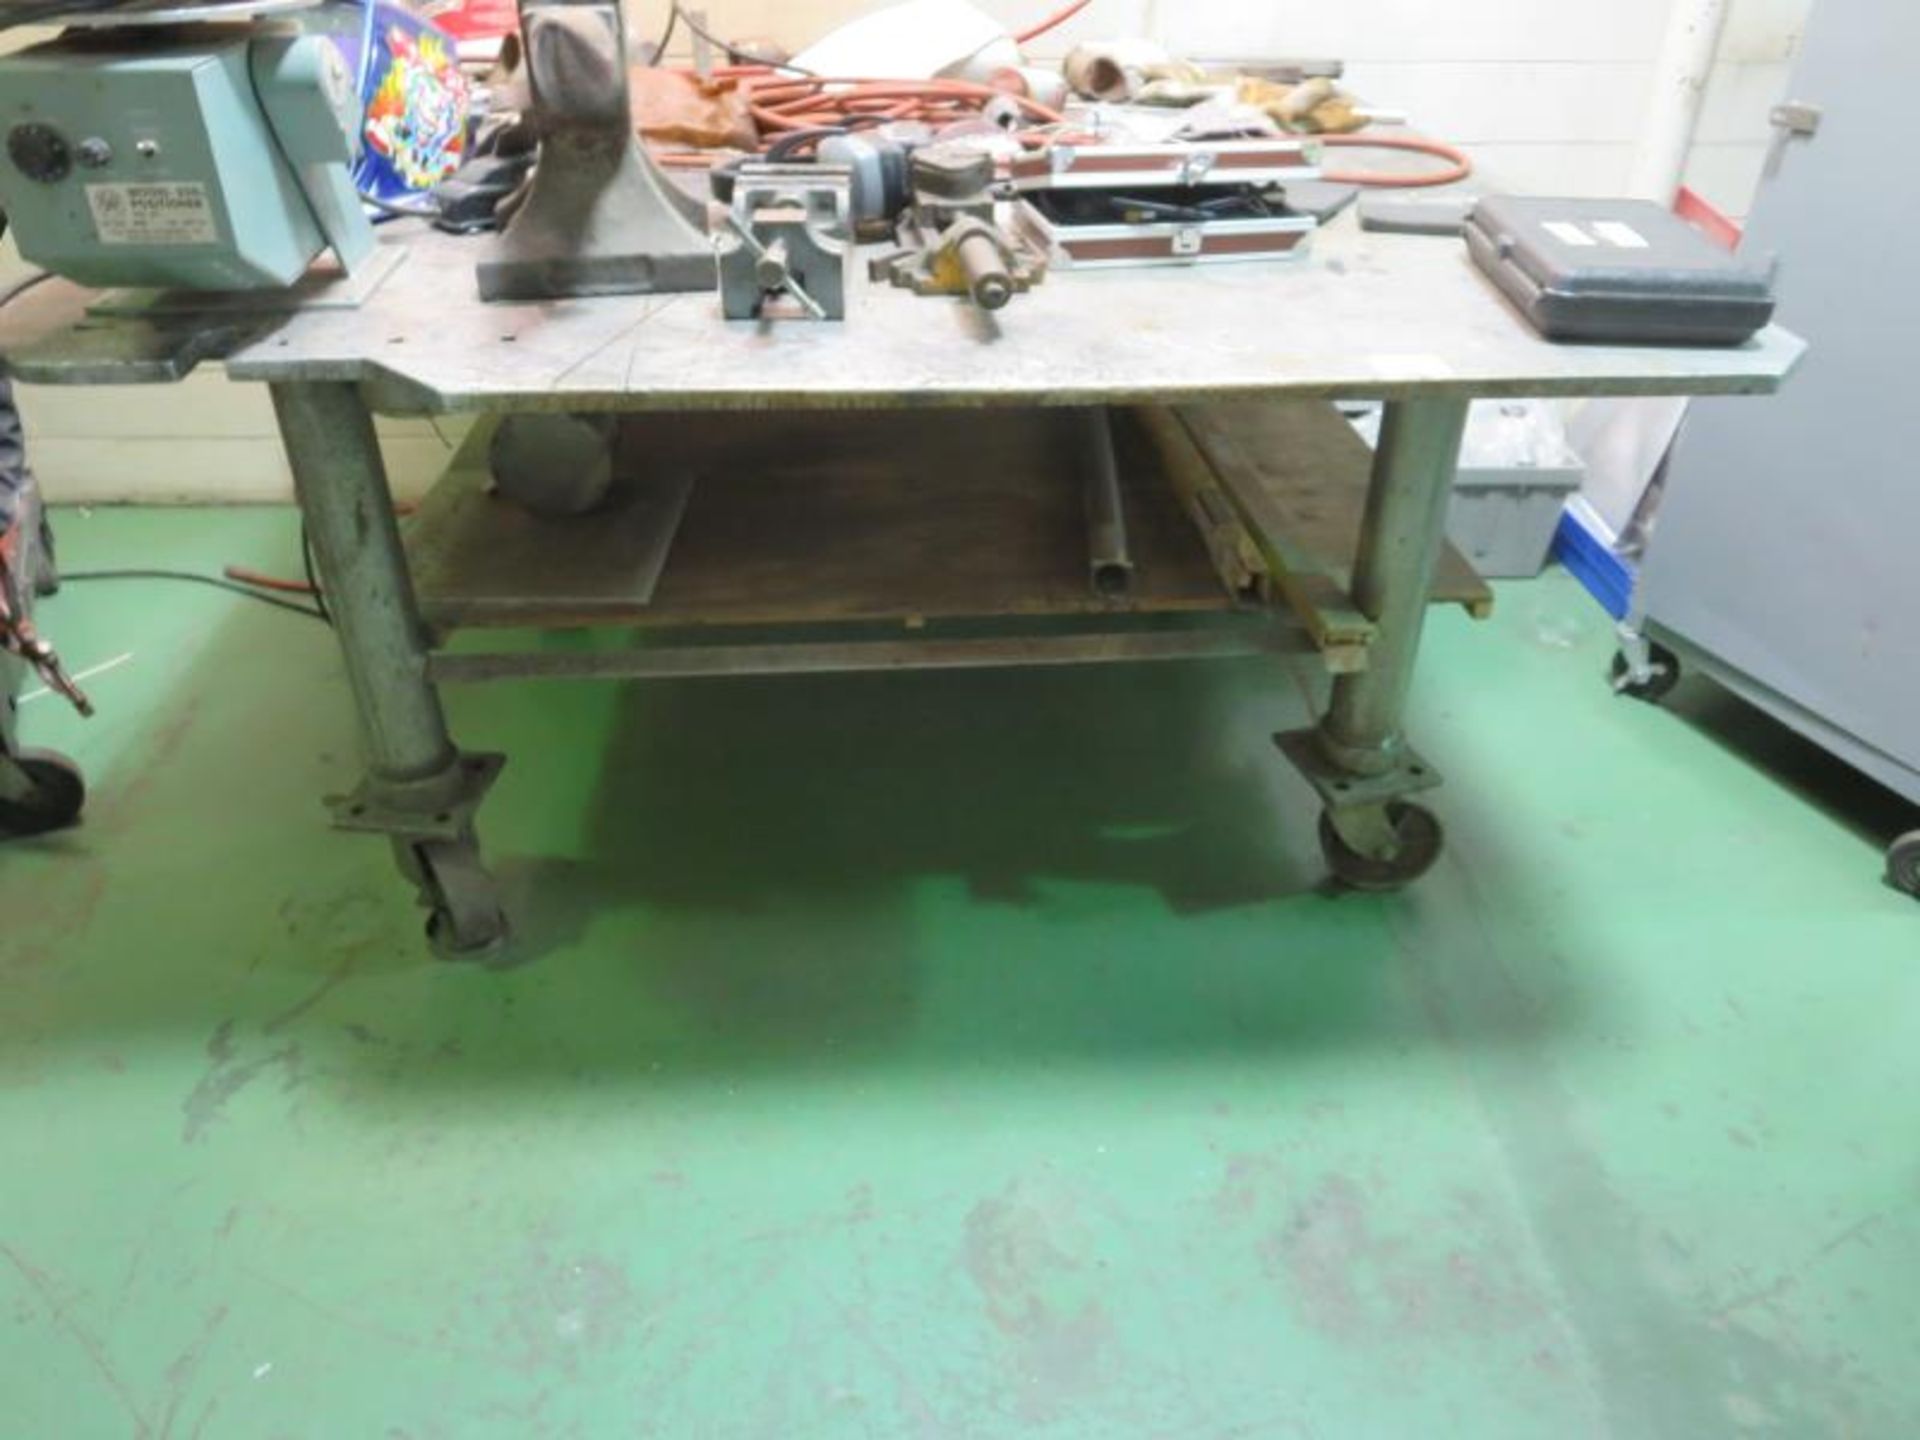 Welding Table; Approx: 60" x 60" x 32", 3/4" top plate, On Casters contents on table not included.